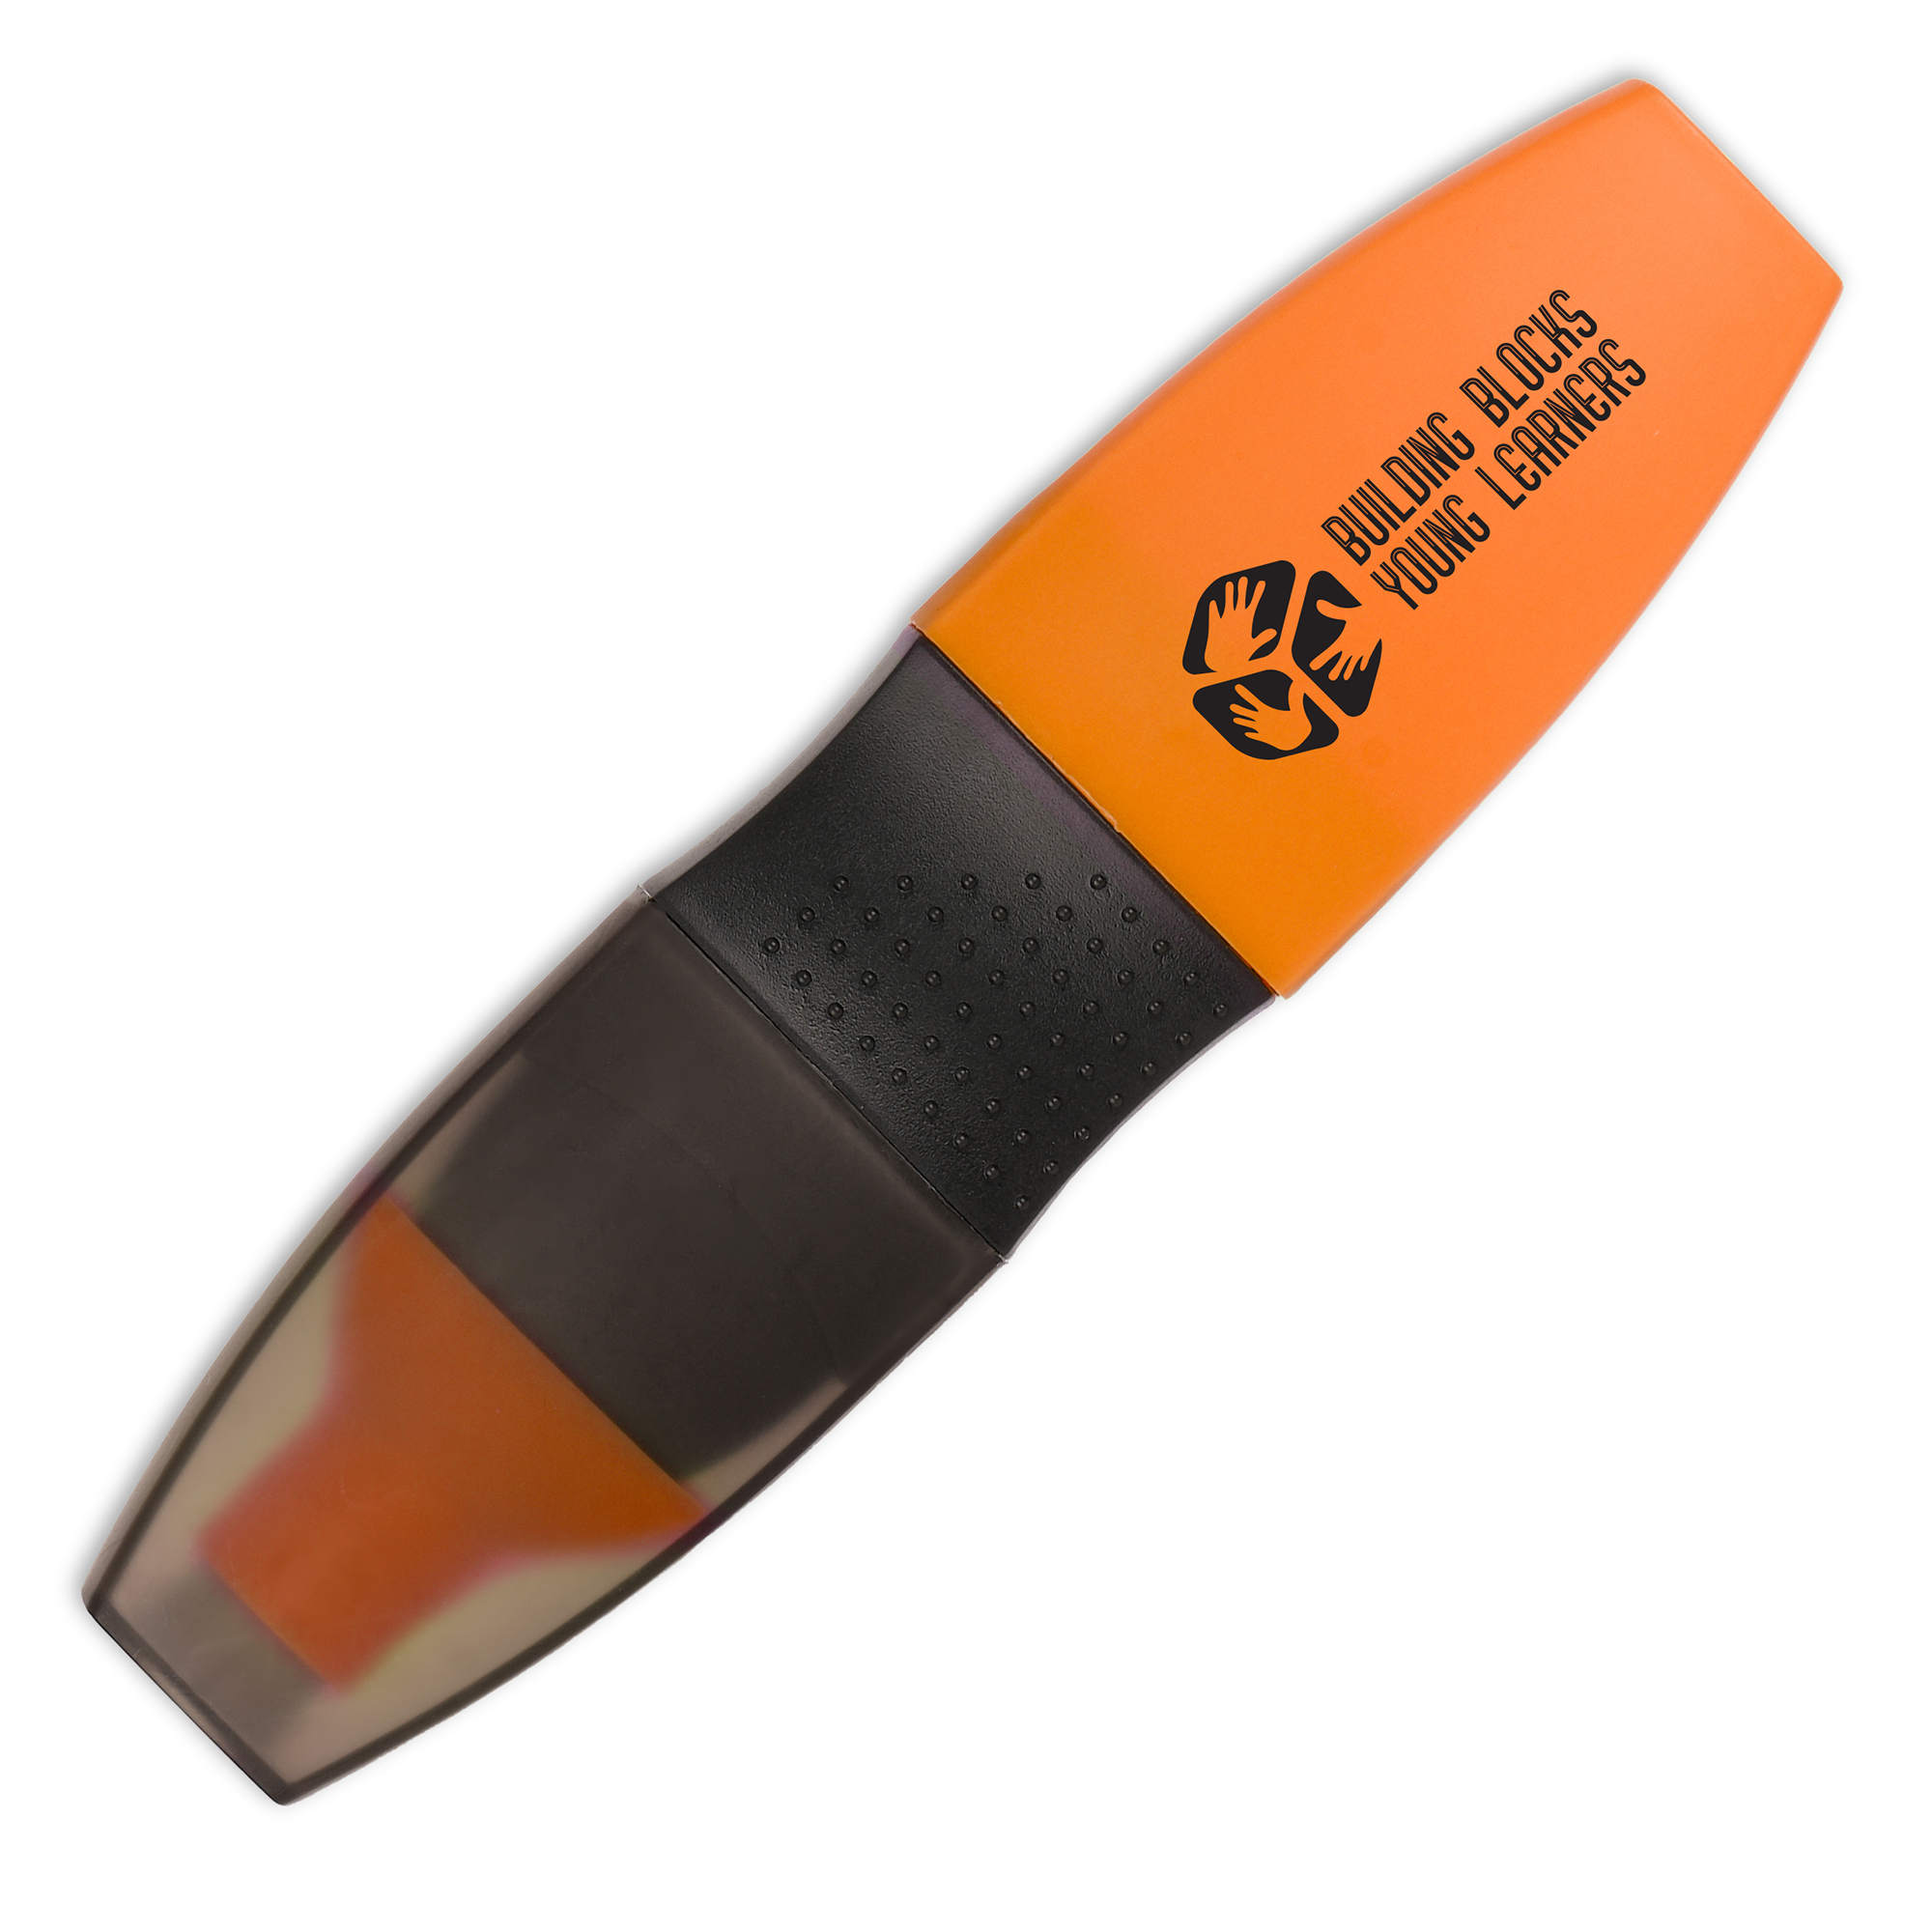 Flat capped neon highlighter with chisel nib, filled with water-based fluorescent ink made in Europe. Highlighter casing is produced from 30% recycled material. Excellent for marking and highlighting on all general paper types.